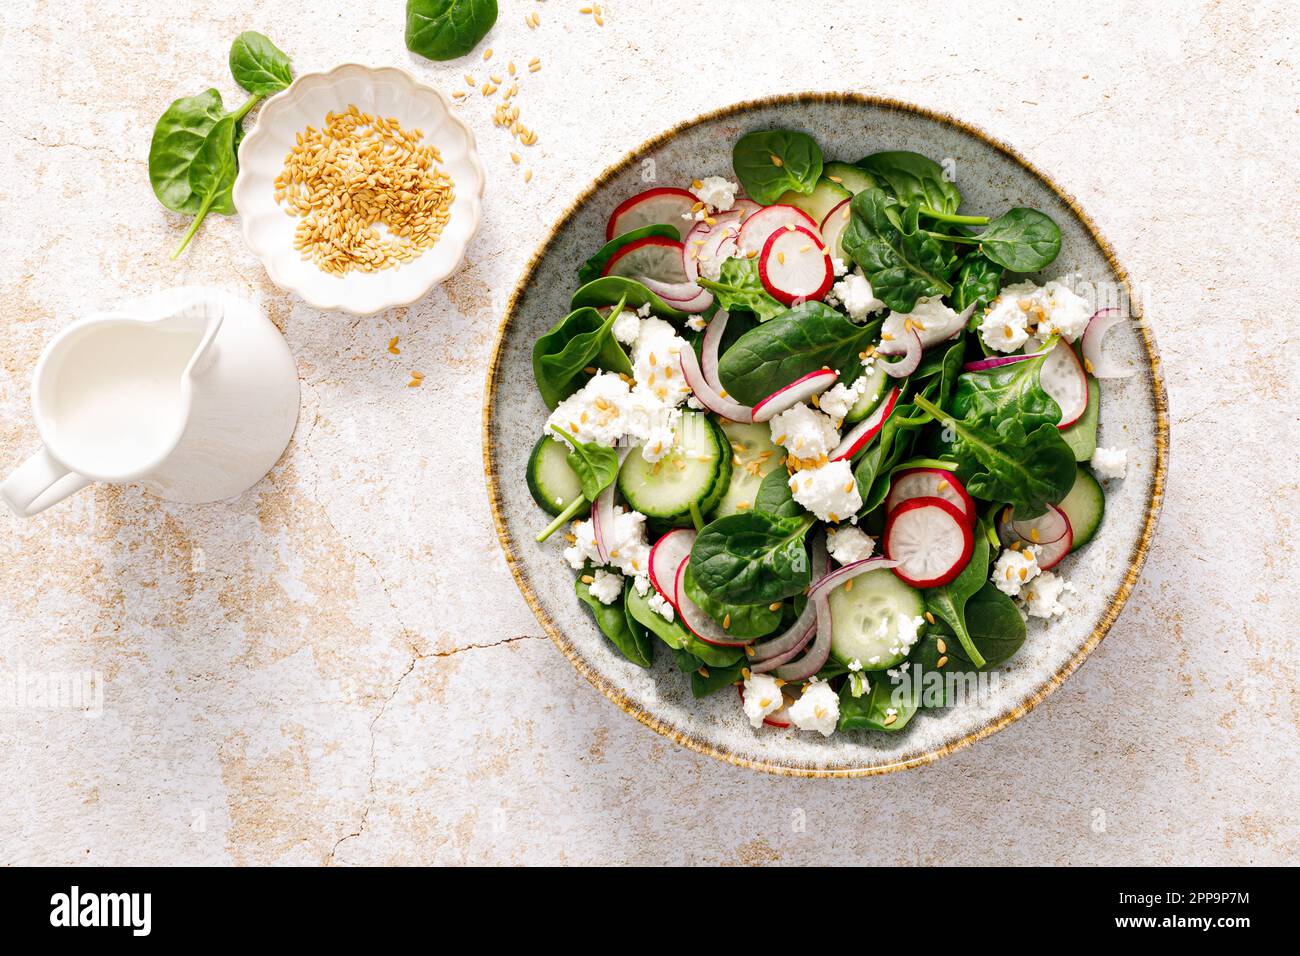 Spinach and cottage cheese fresh green vegetable salad with radish, cucumber and yogurt, healthy diet food, top view Stock Photo